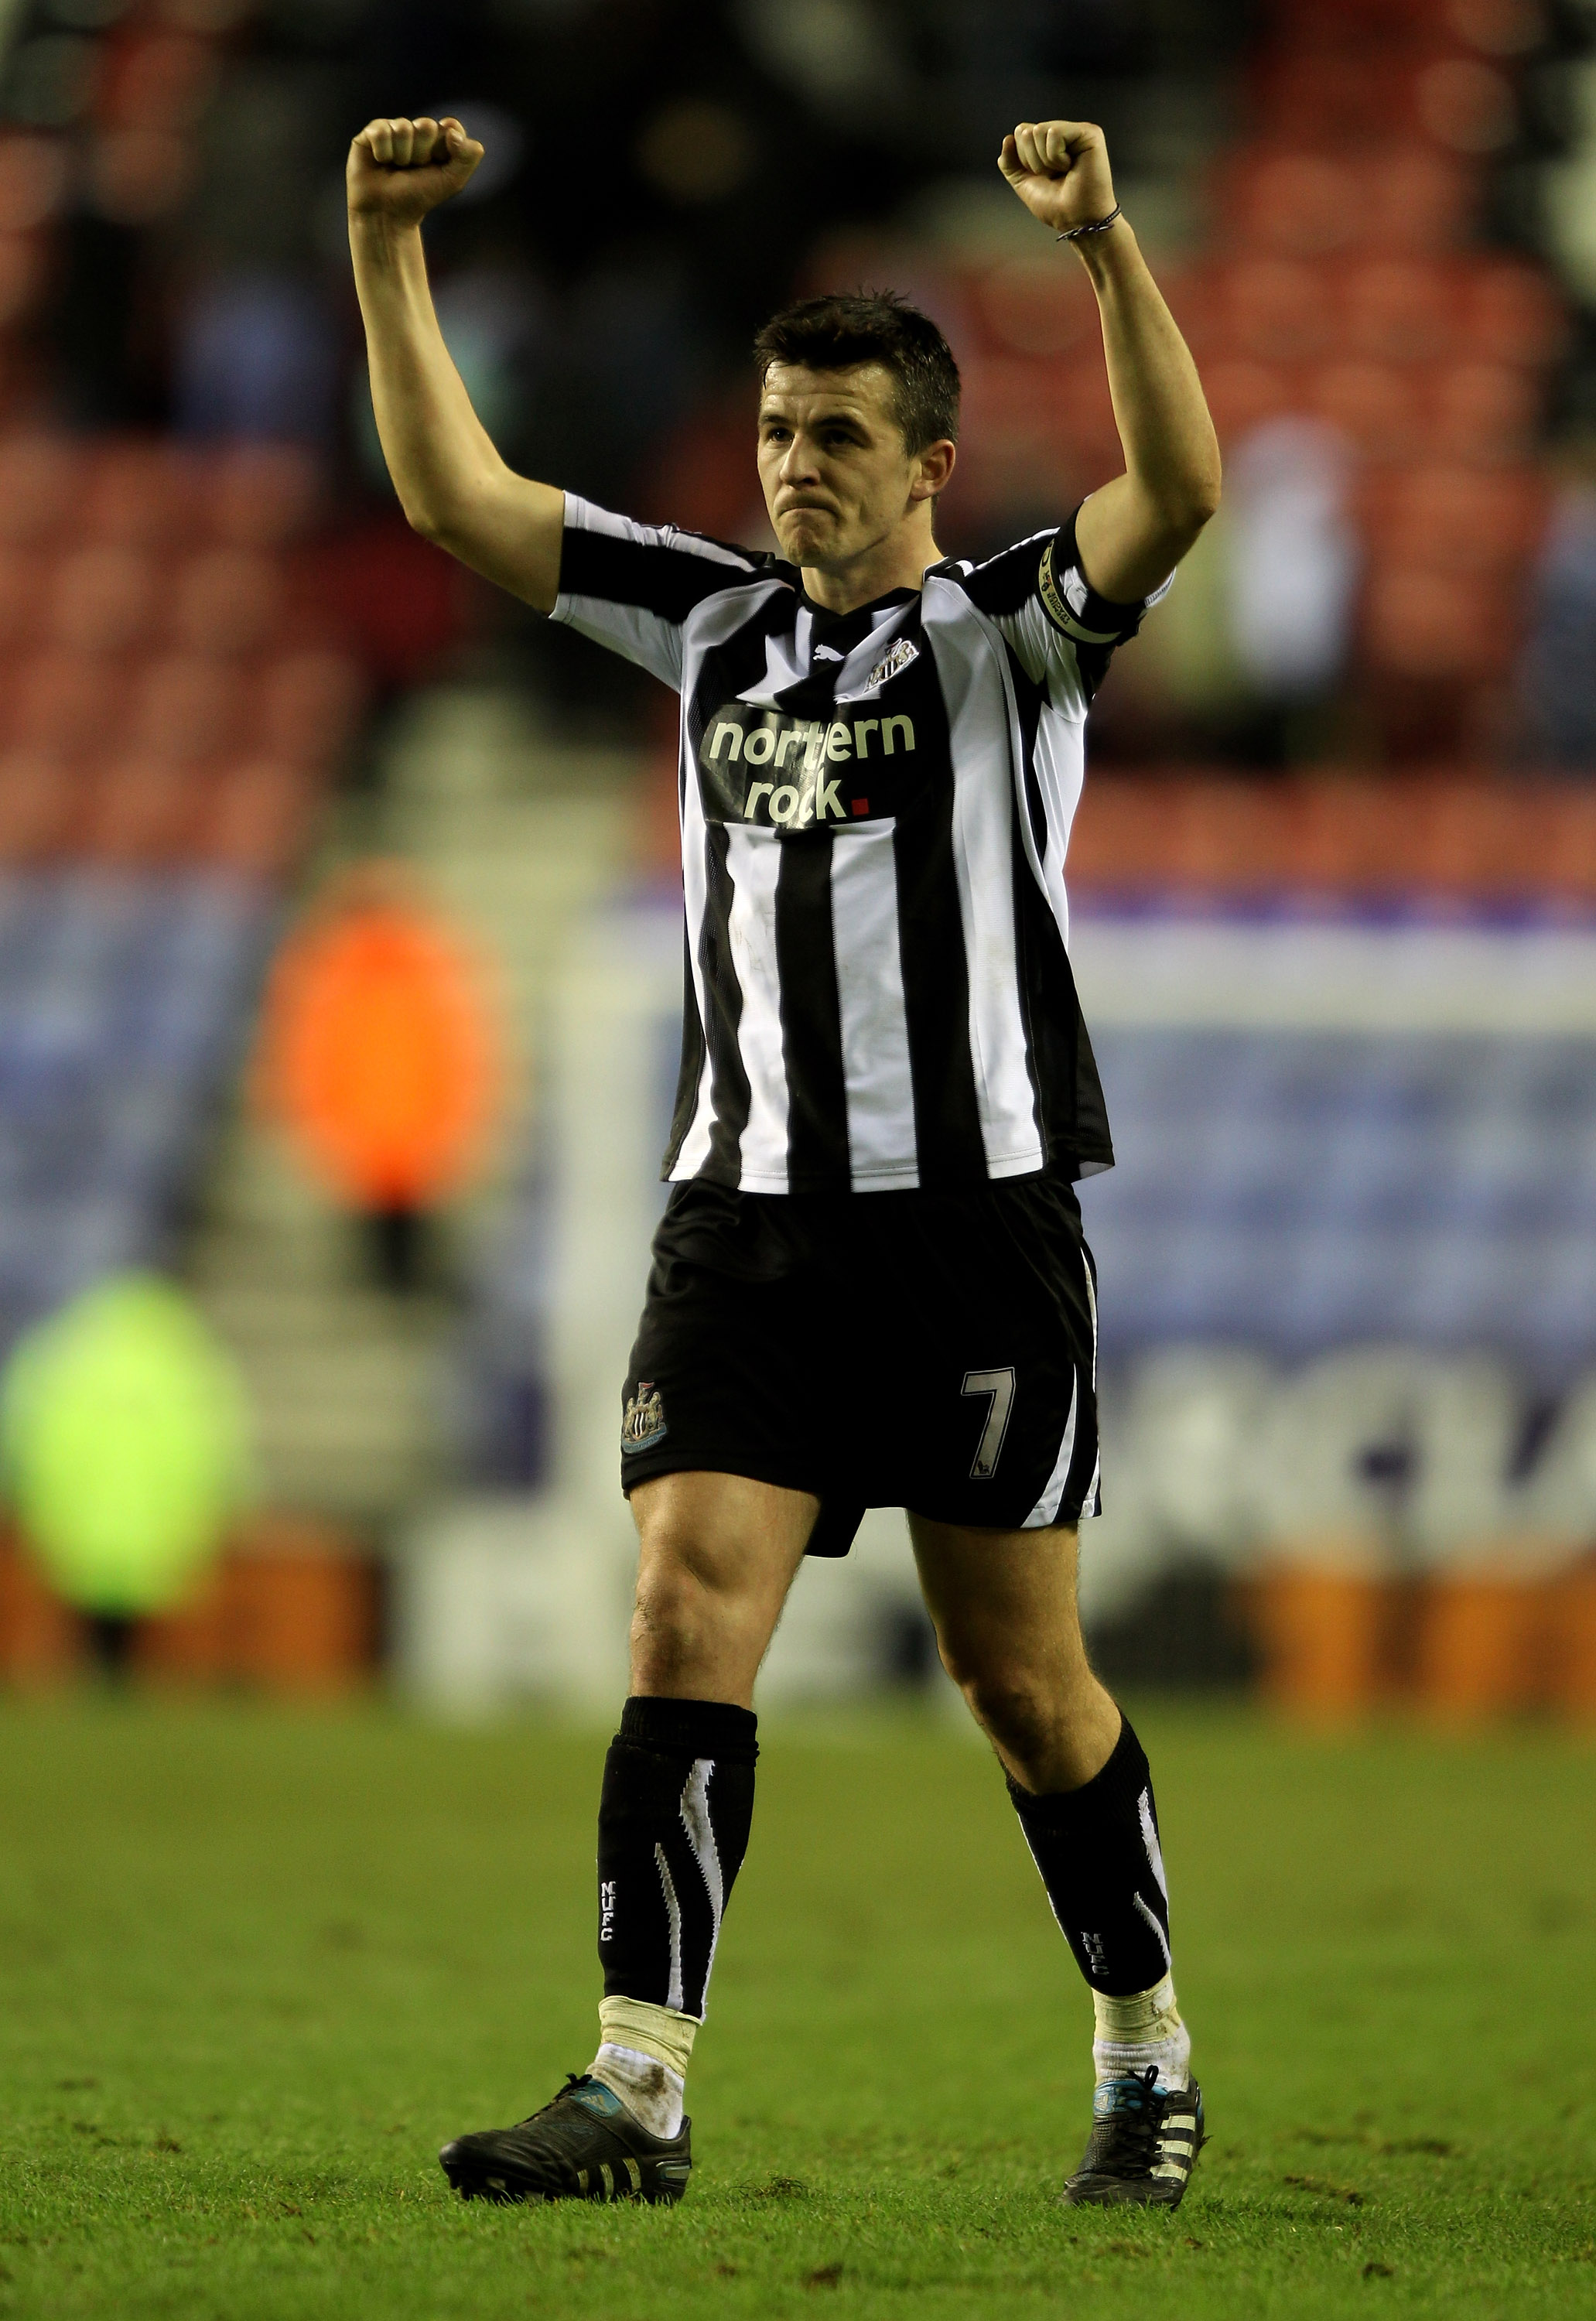 WIGAN, ENGLAND - JANUARY 02:  Joey Barton of Newcastle United celebrates at the end of the Barclays Premier League match between Wigan Athletic and Newcastle United at the DW Stadium on January 2, 2011 in Wigan, England.  (Photo by Clive Brunskill/Getty I